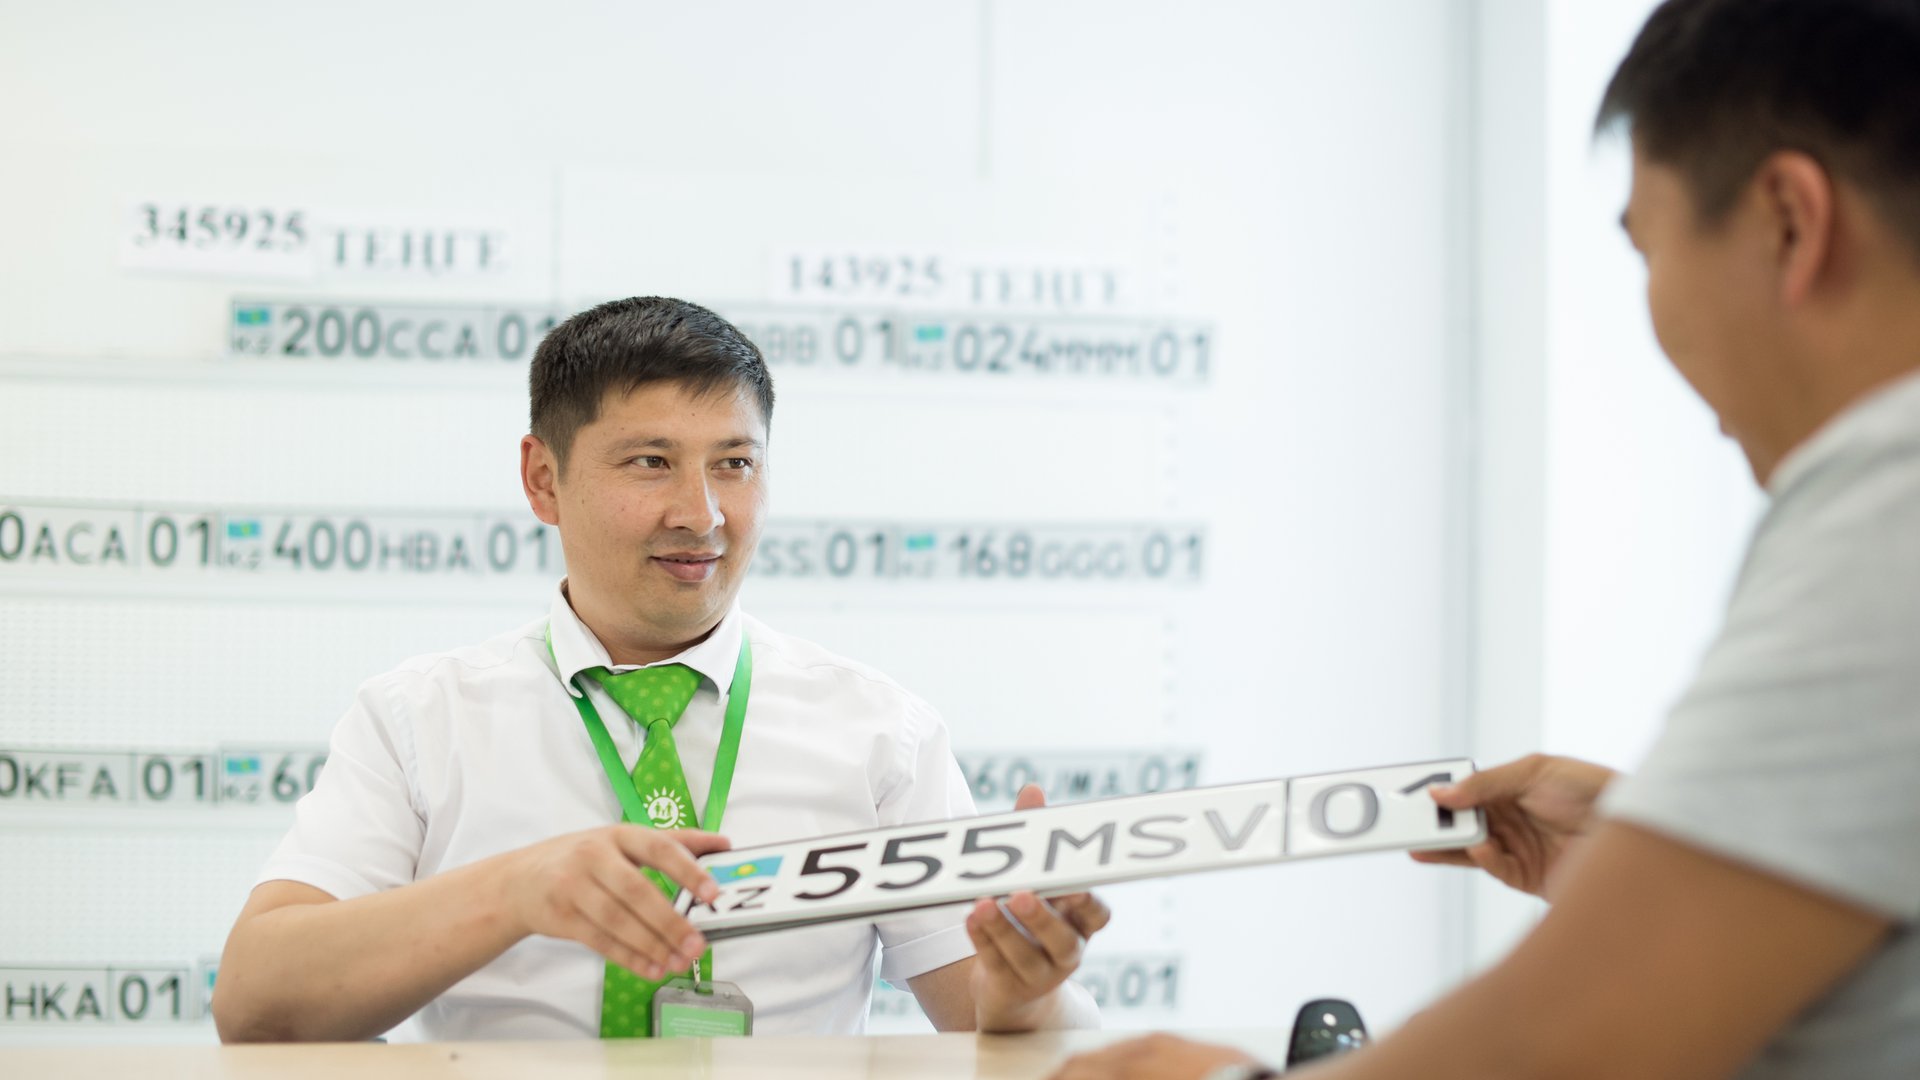 Fewer people to order VIP license plates in Kazakhstan